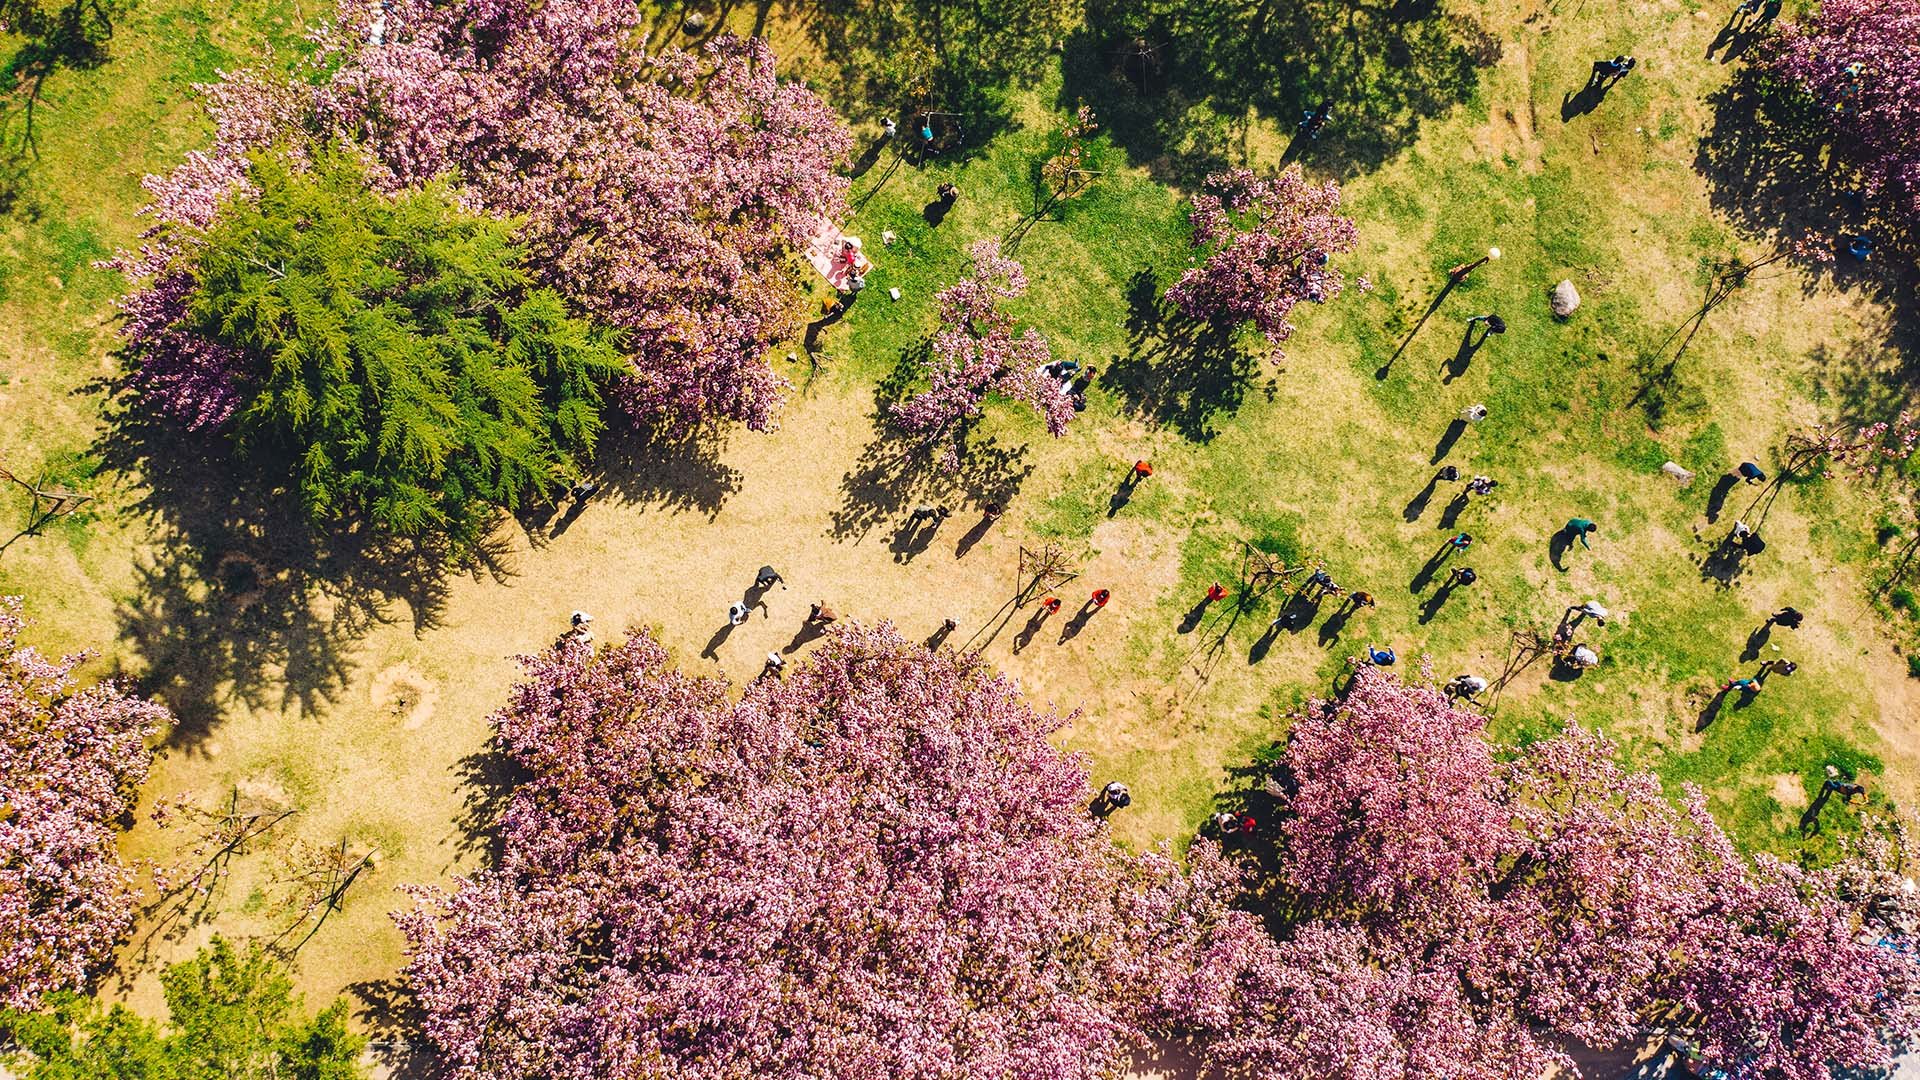 Aerial view of people enjoying cherry blossom trees in full bloom at a park, with the vibrant pink flowers contrasting the green grass and trees.